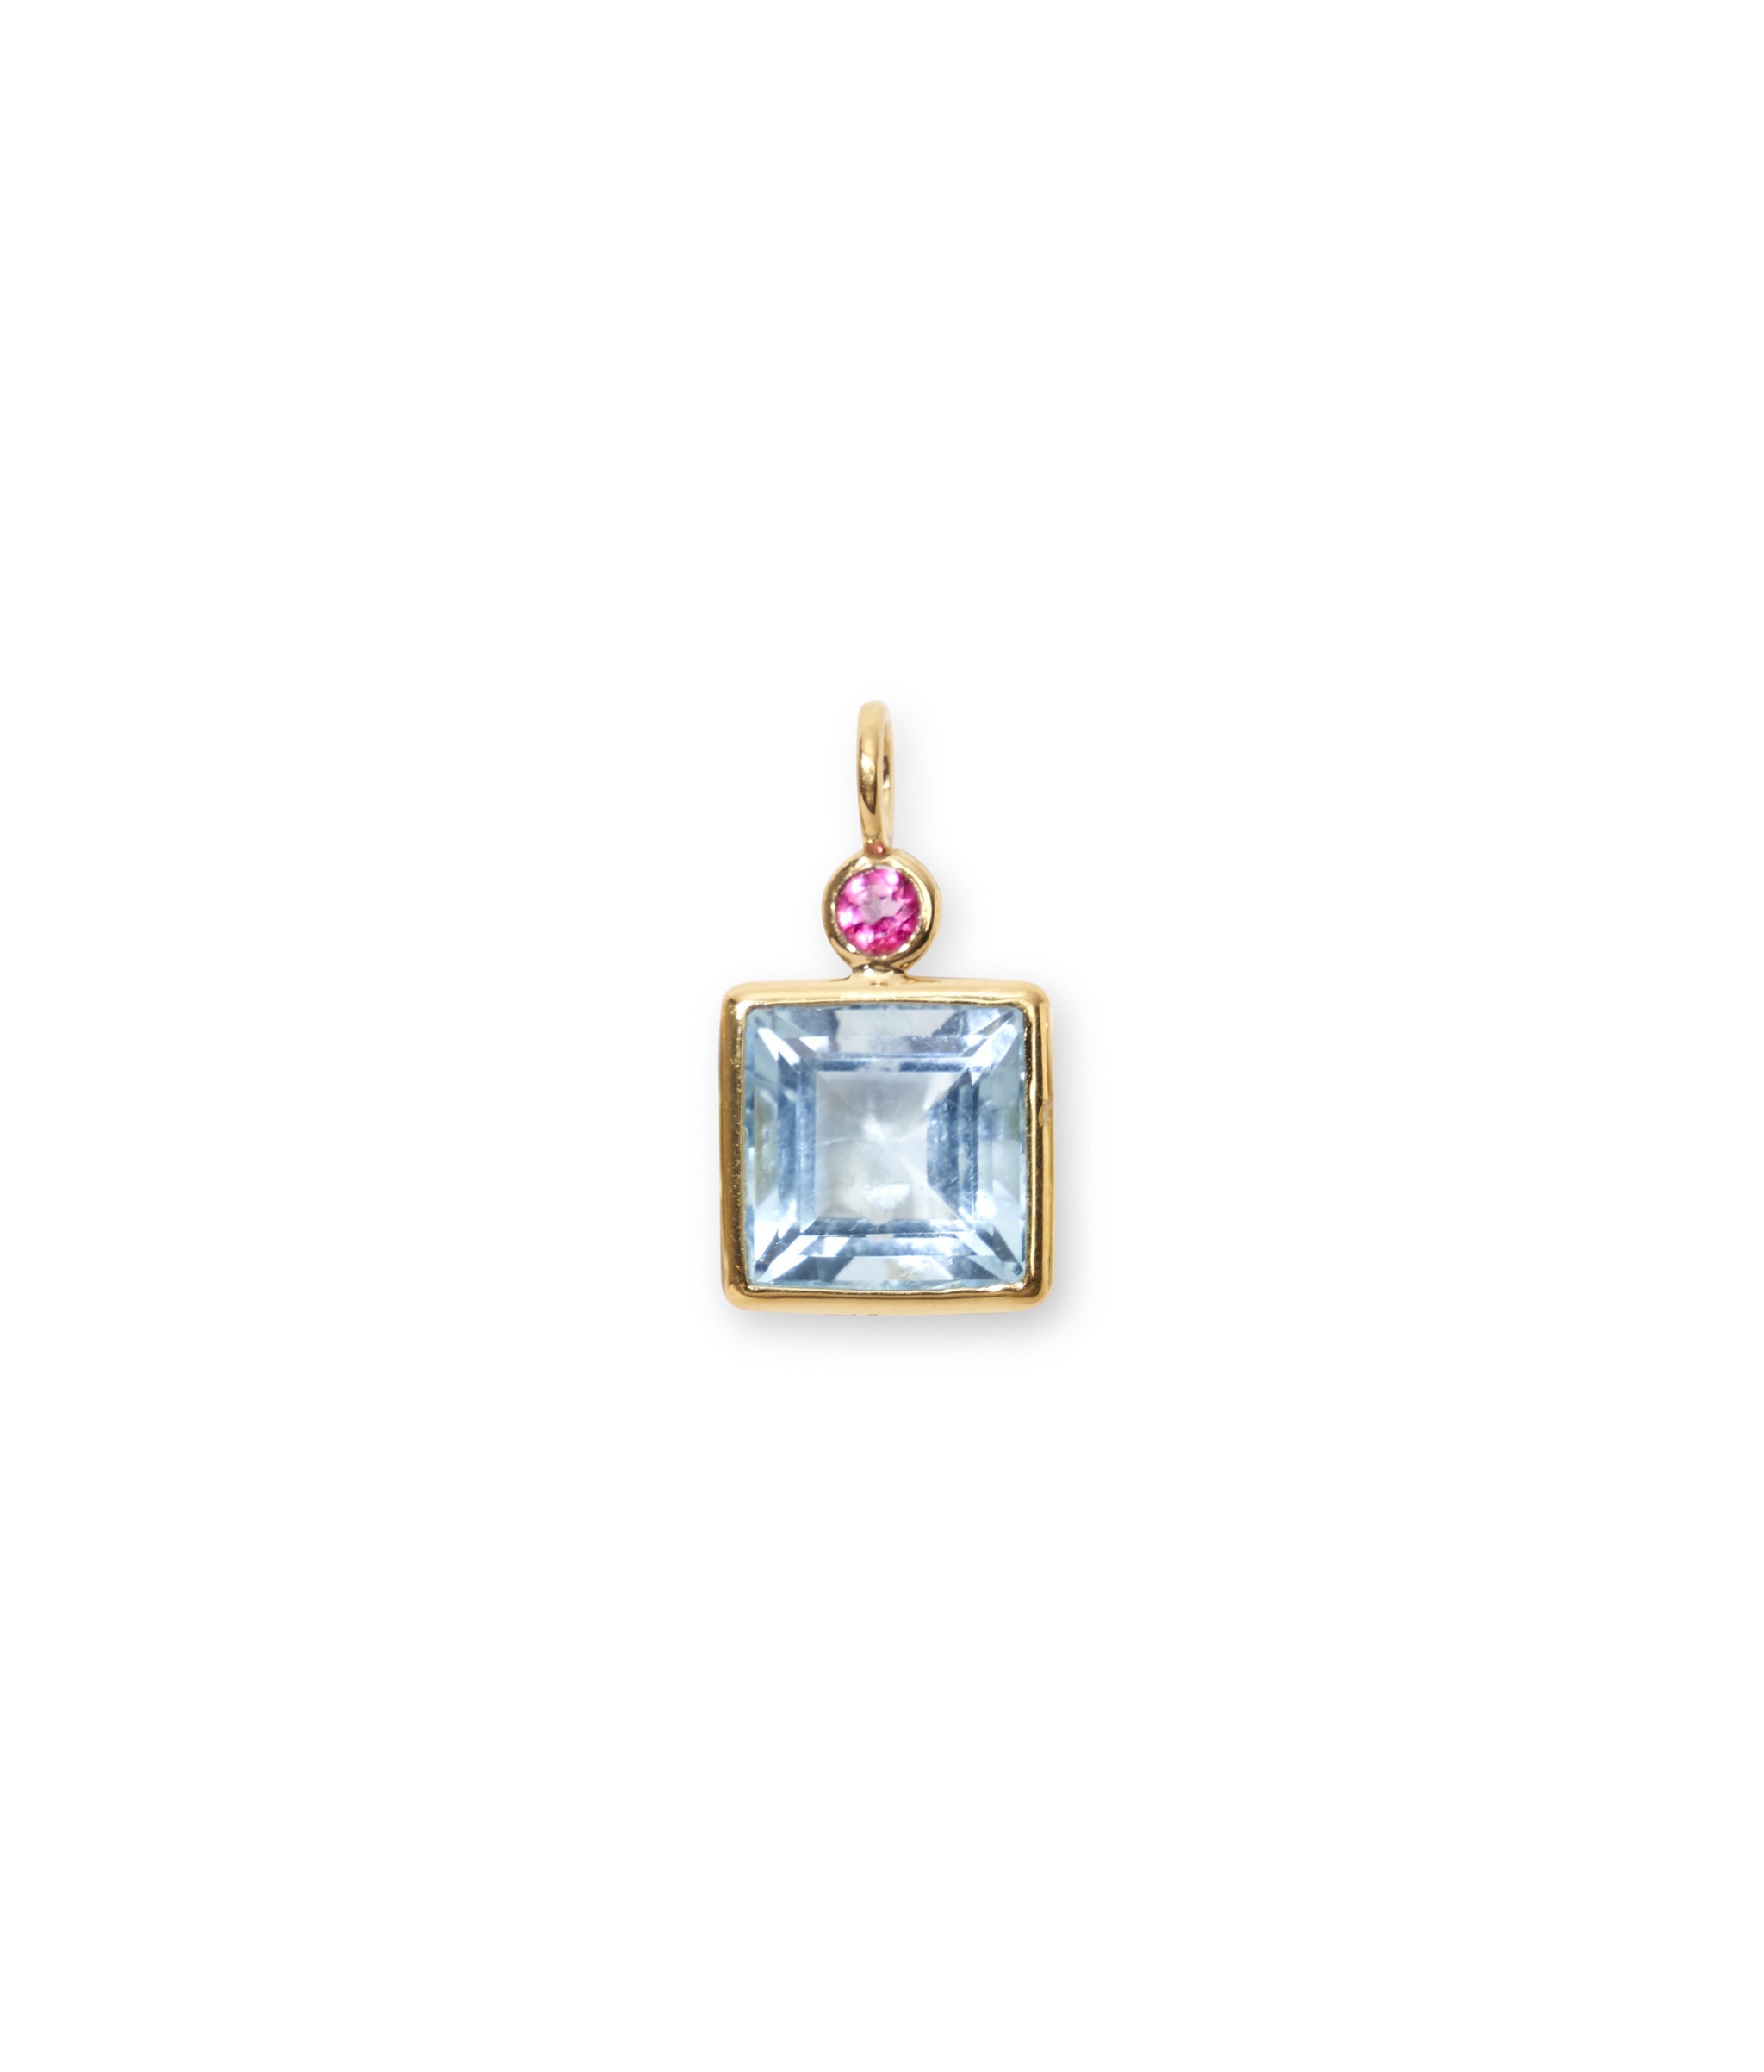 Pink & Sky Blue Topaz 14k Gold Necklace Charm. Small round pink topaz with blue topaz square and gold bezels.